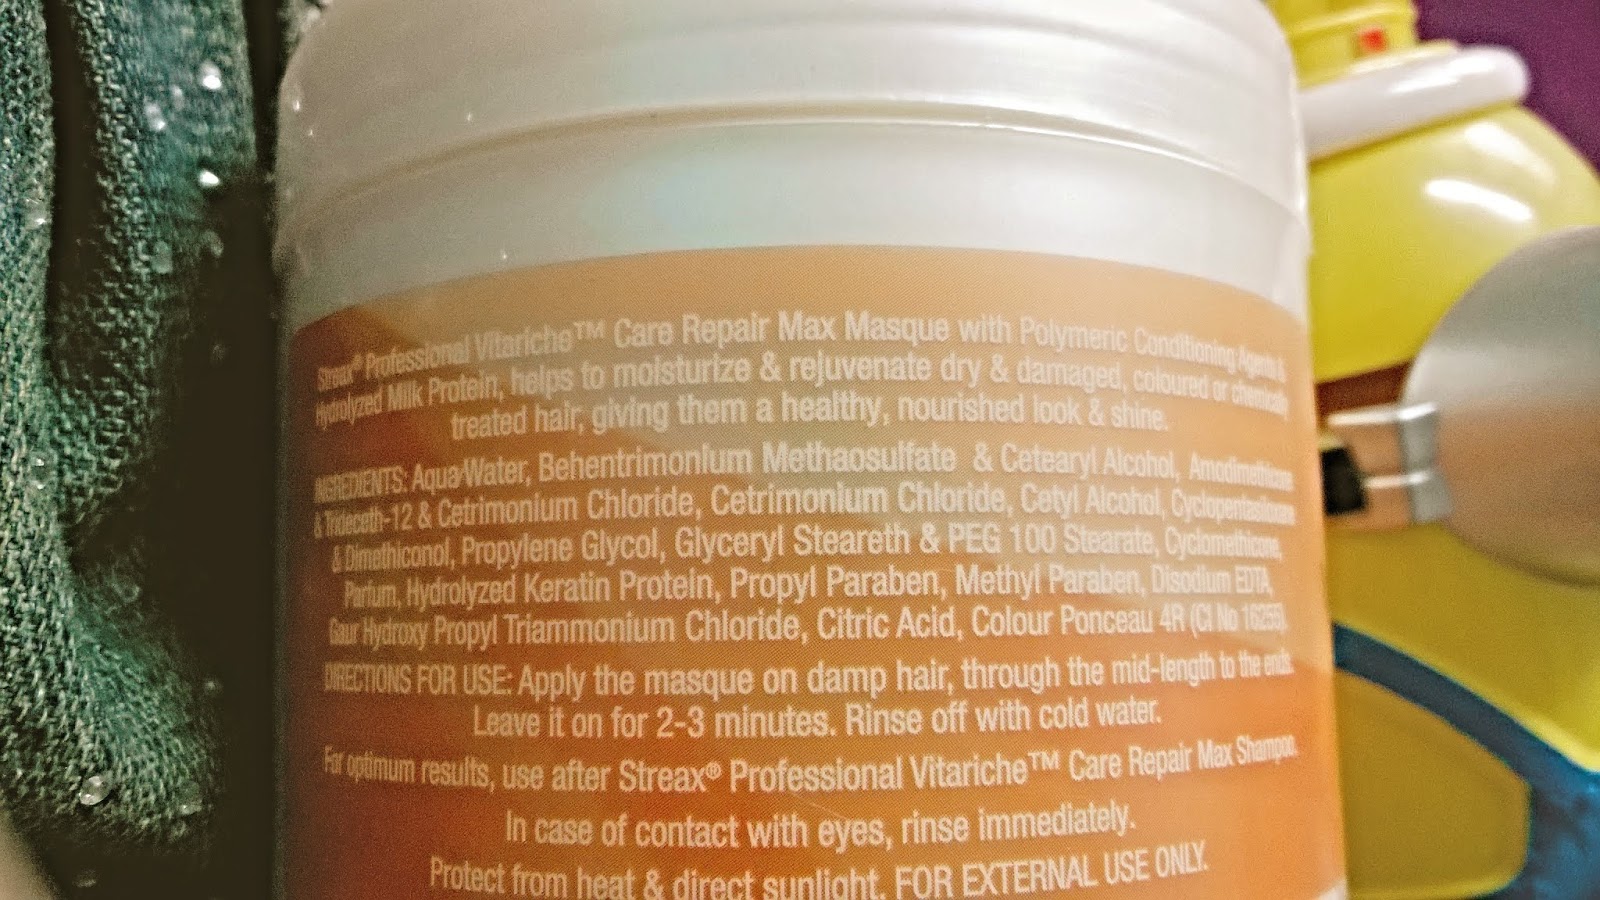 A Beautiful Life : Streax Pro Nutri Care Repair Max Masque Review | Beauty  Product Review | Hair Care Product Review | Indian Beauty Lifestyle Blogger